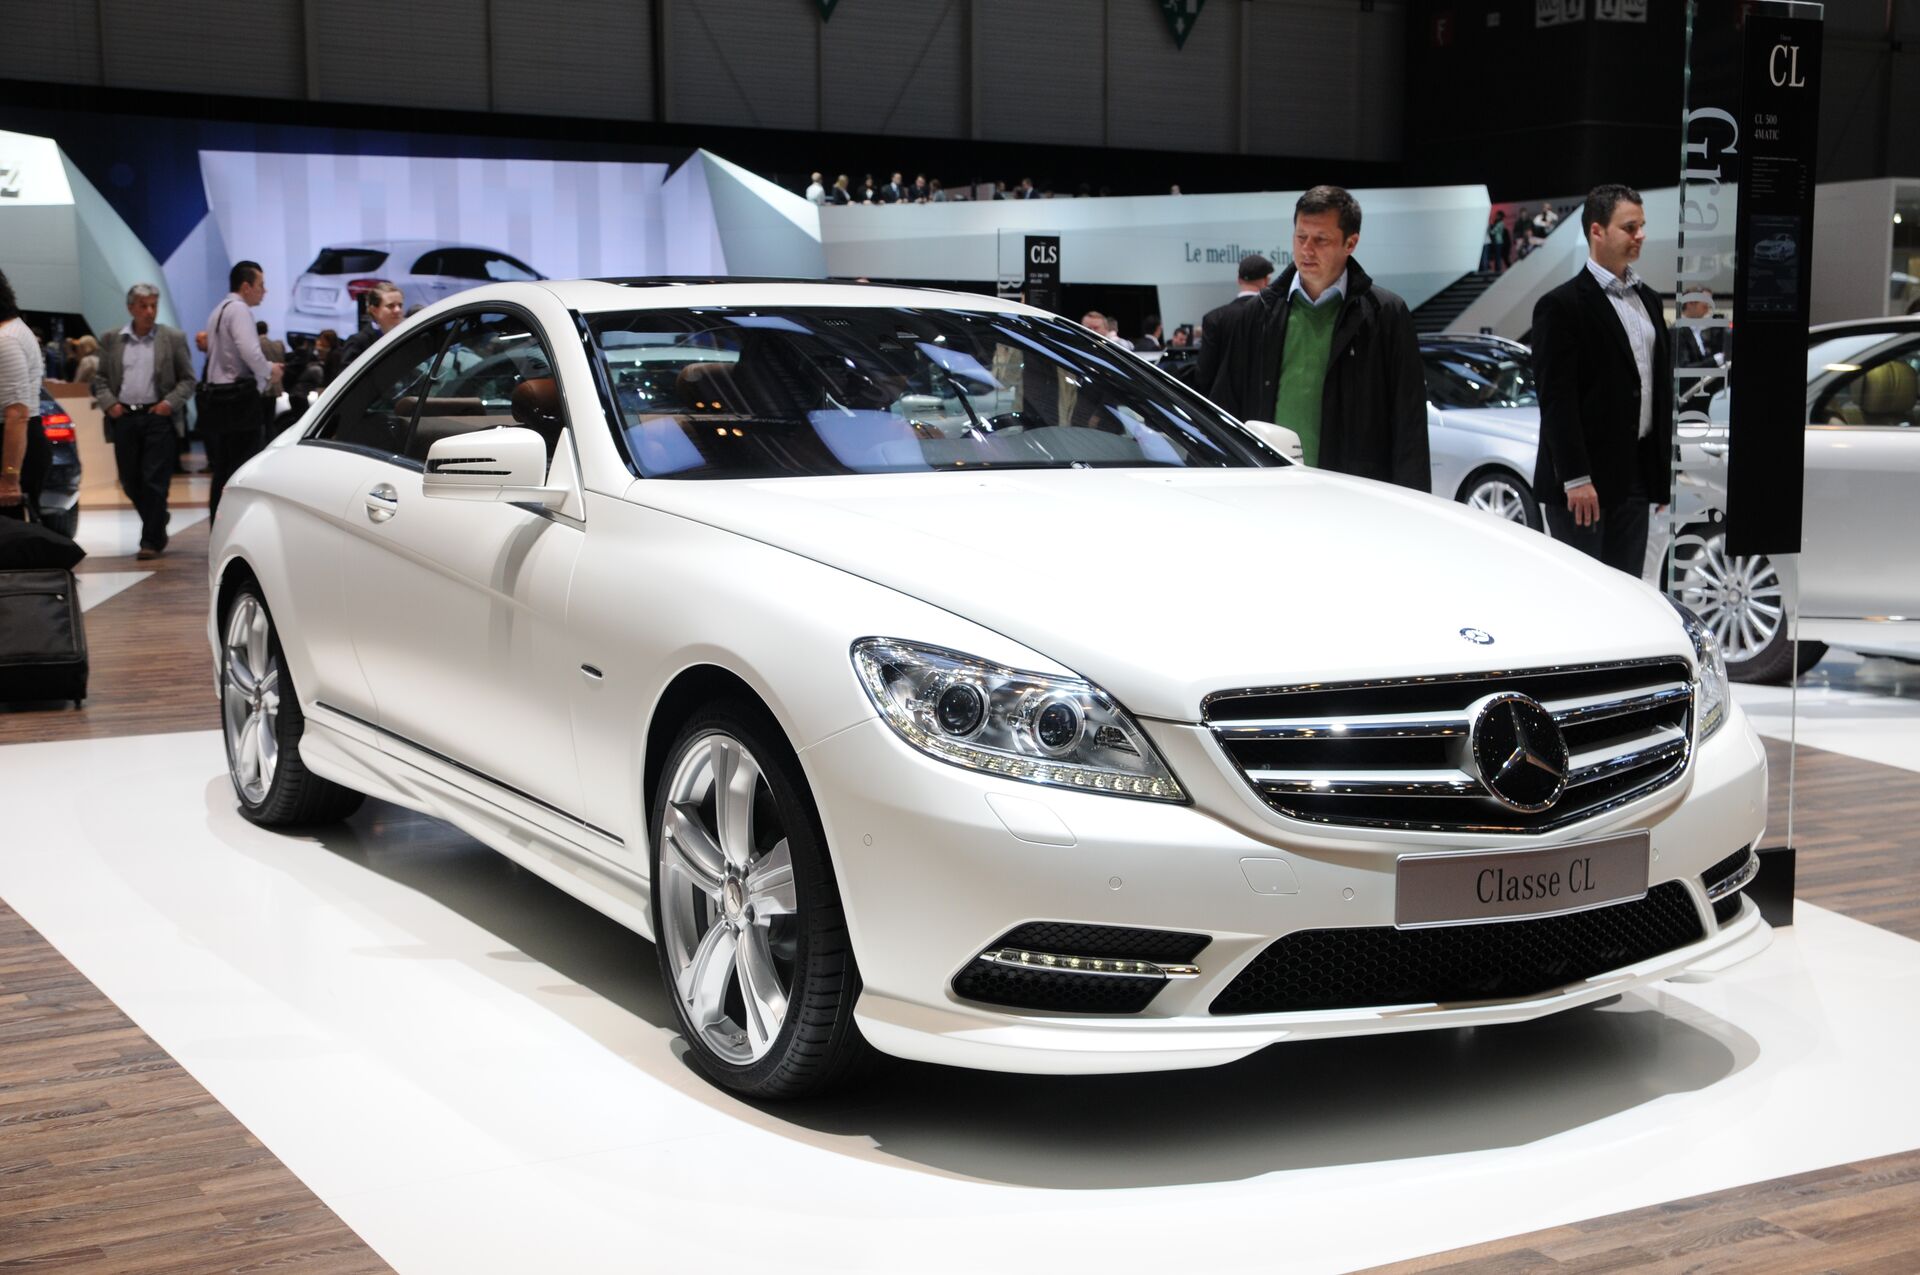 Cl c 9. Mercedes CL 216 Facelift. Mercedes CL c216. Mercedes matic 7. Мерседес CL 2010 купе.